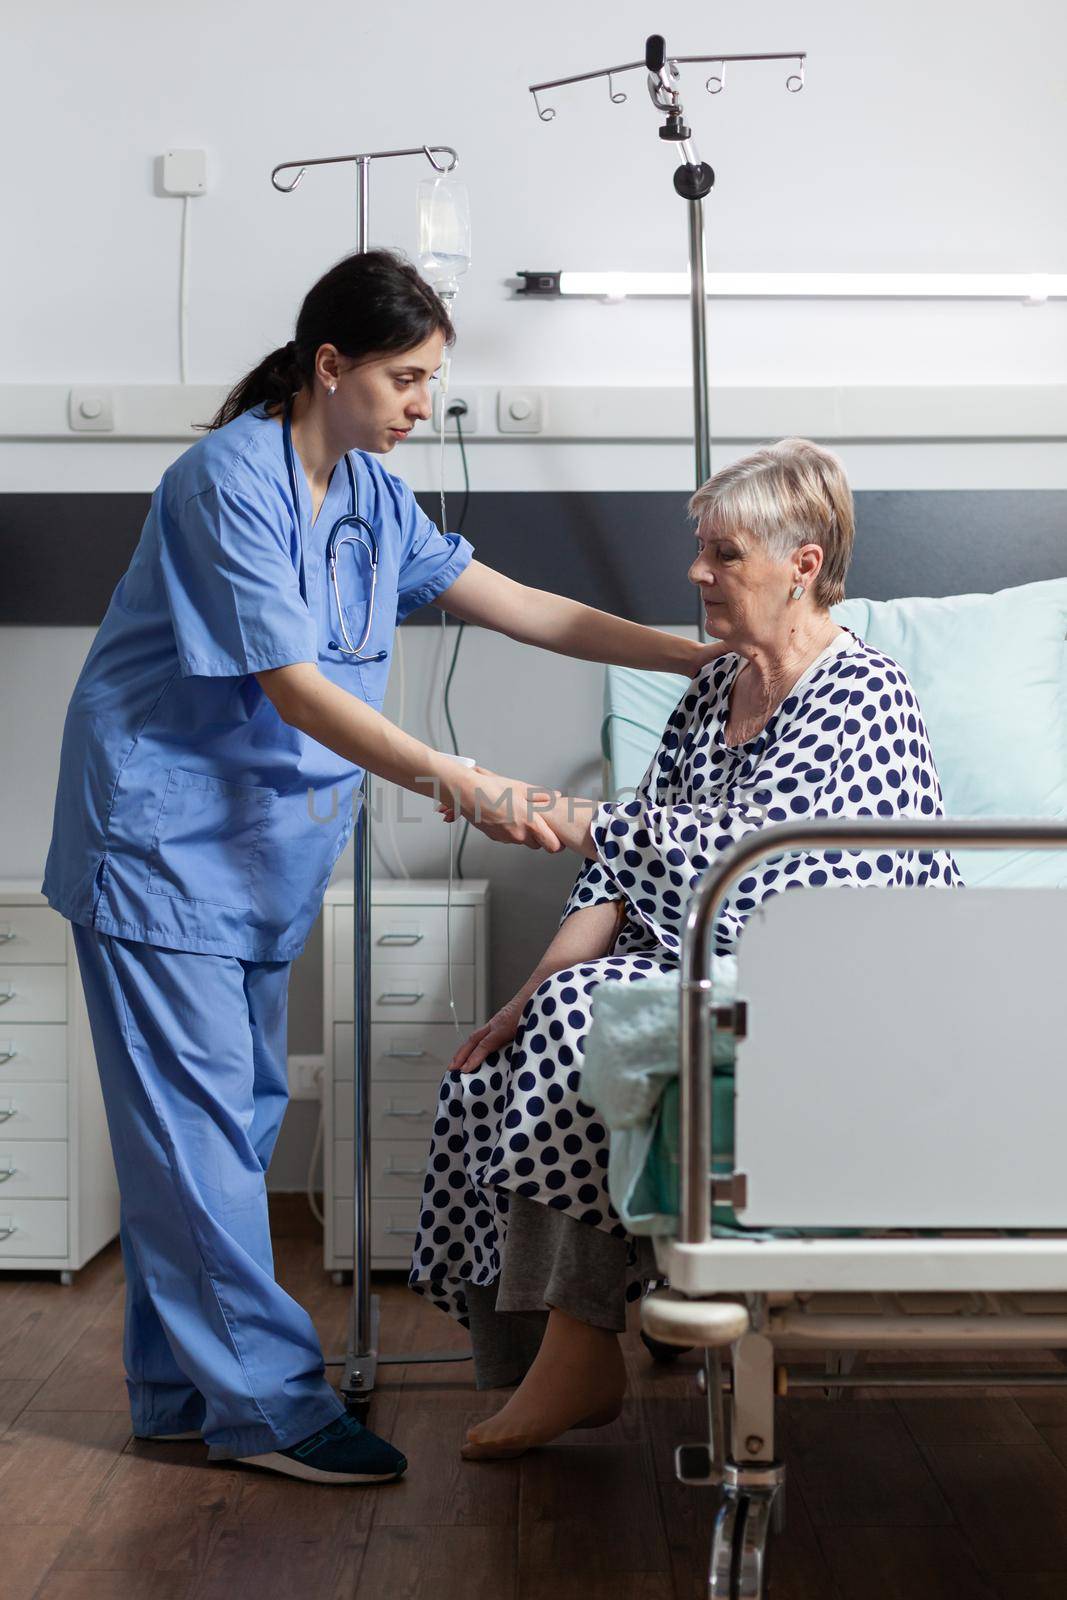 Medical nurse helping senior woman patient getting up from bed in hospital room, with iv drip bag attached while she gets intravenous treatment and oxymeter measuring blood oxygen saturation.